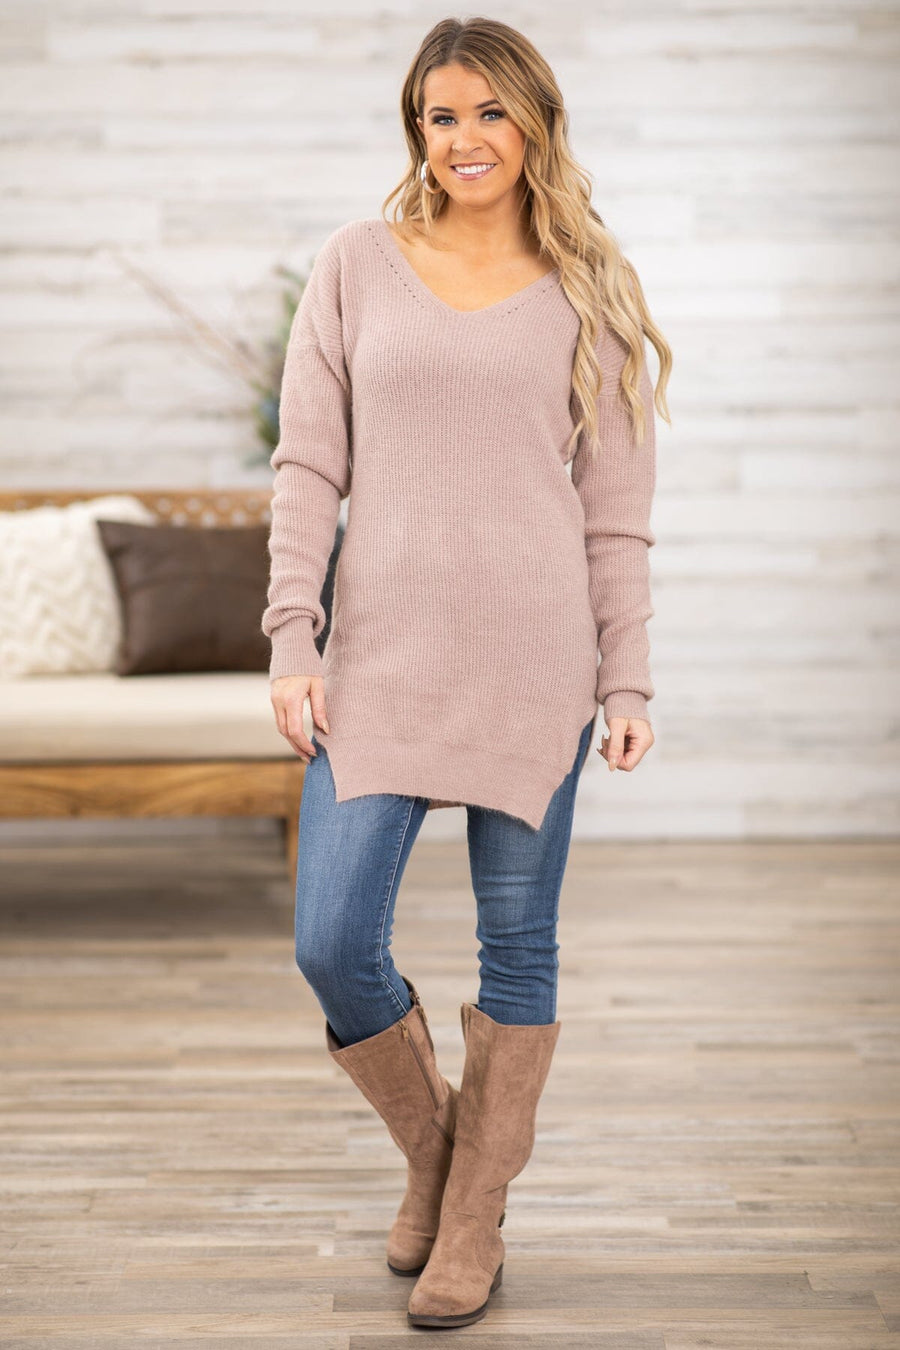 Tan V-Neck Lightweight Tunic Sweater - Filly Flair